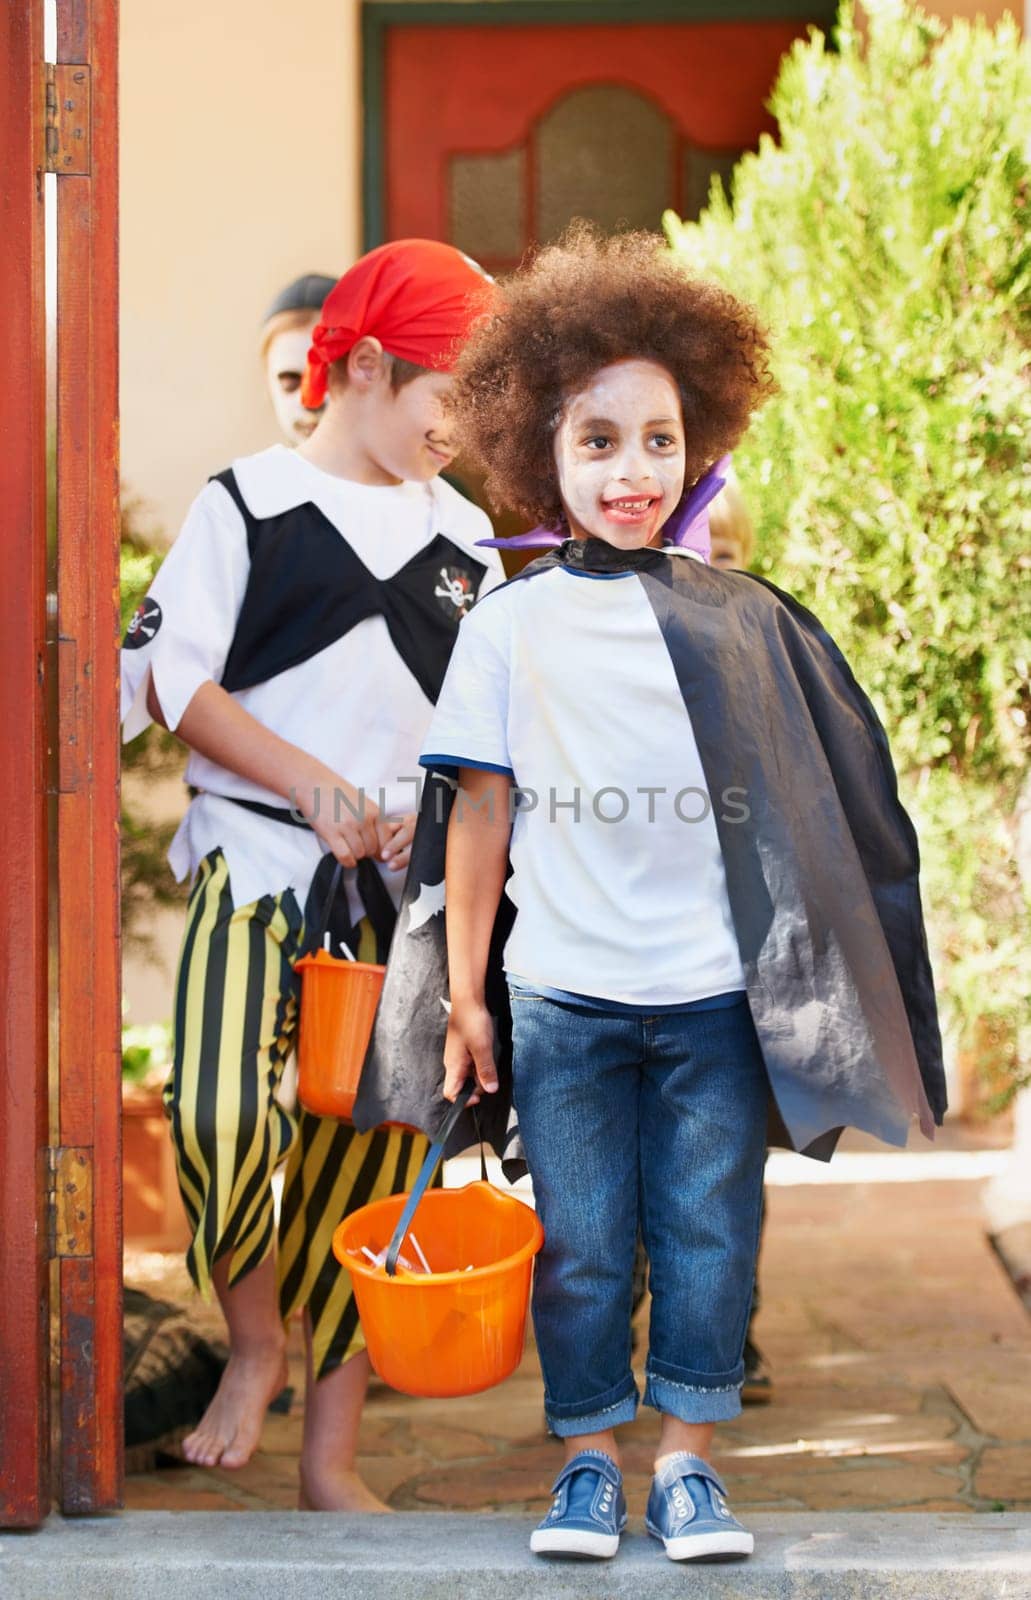 Children, halloween and trick or treat outdoor in costume for celebrate, holiday and spooky outfit or tradition. Kids, event and autumn role play with basket, fancy dress or happy in garden of home.